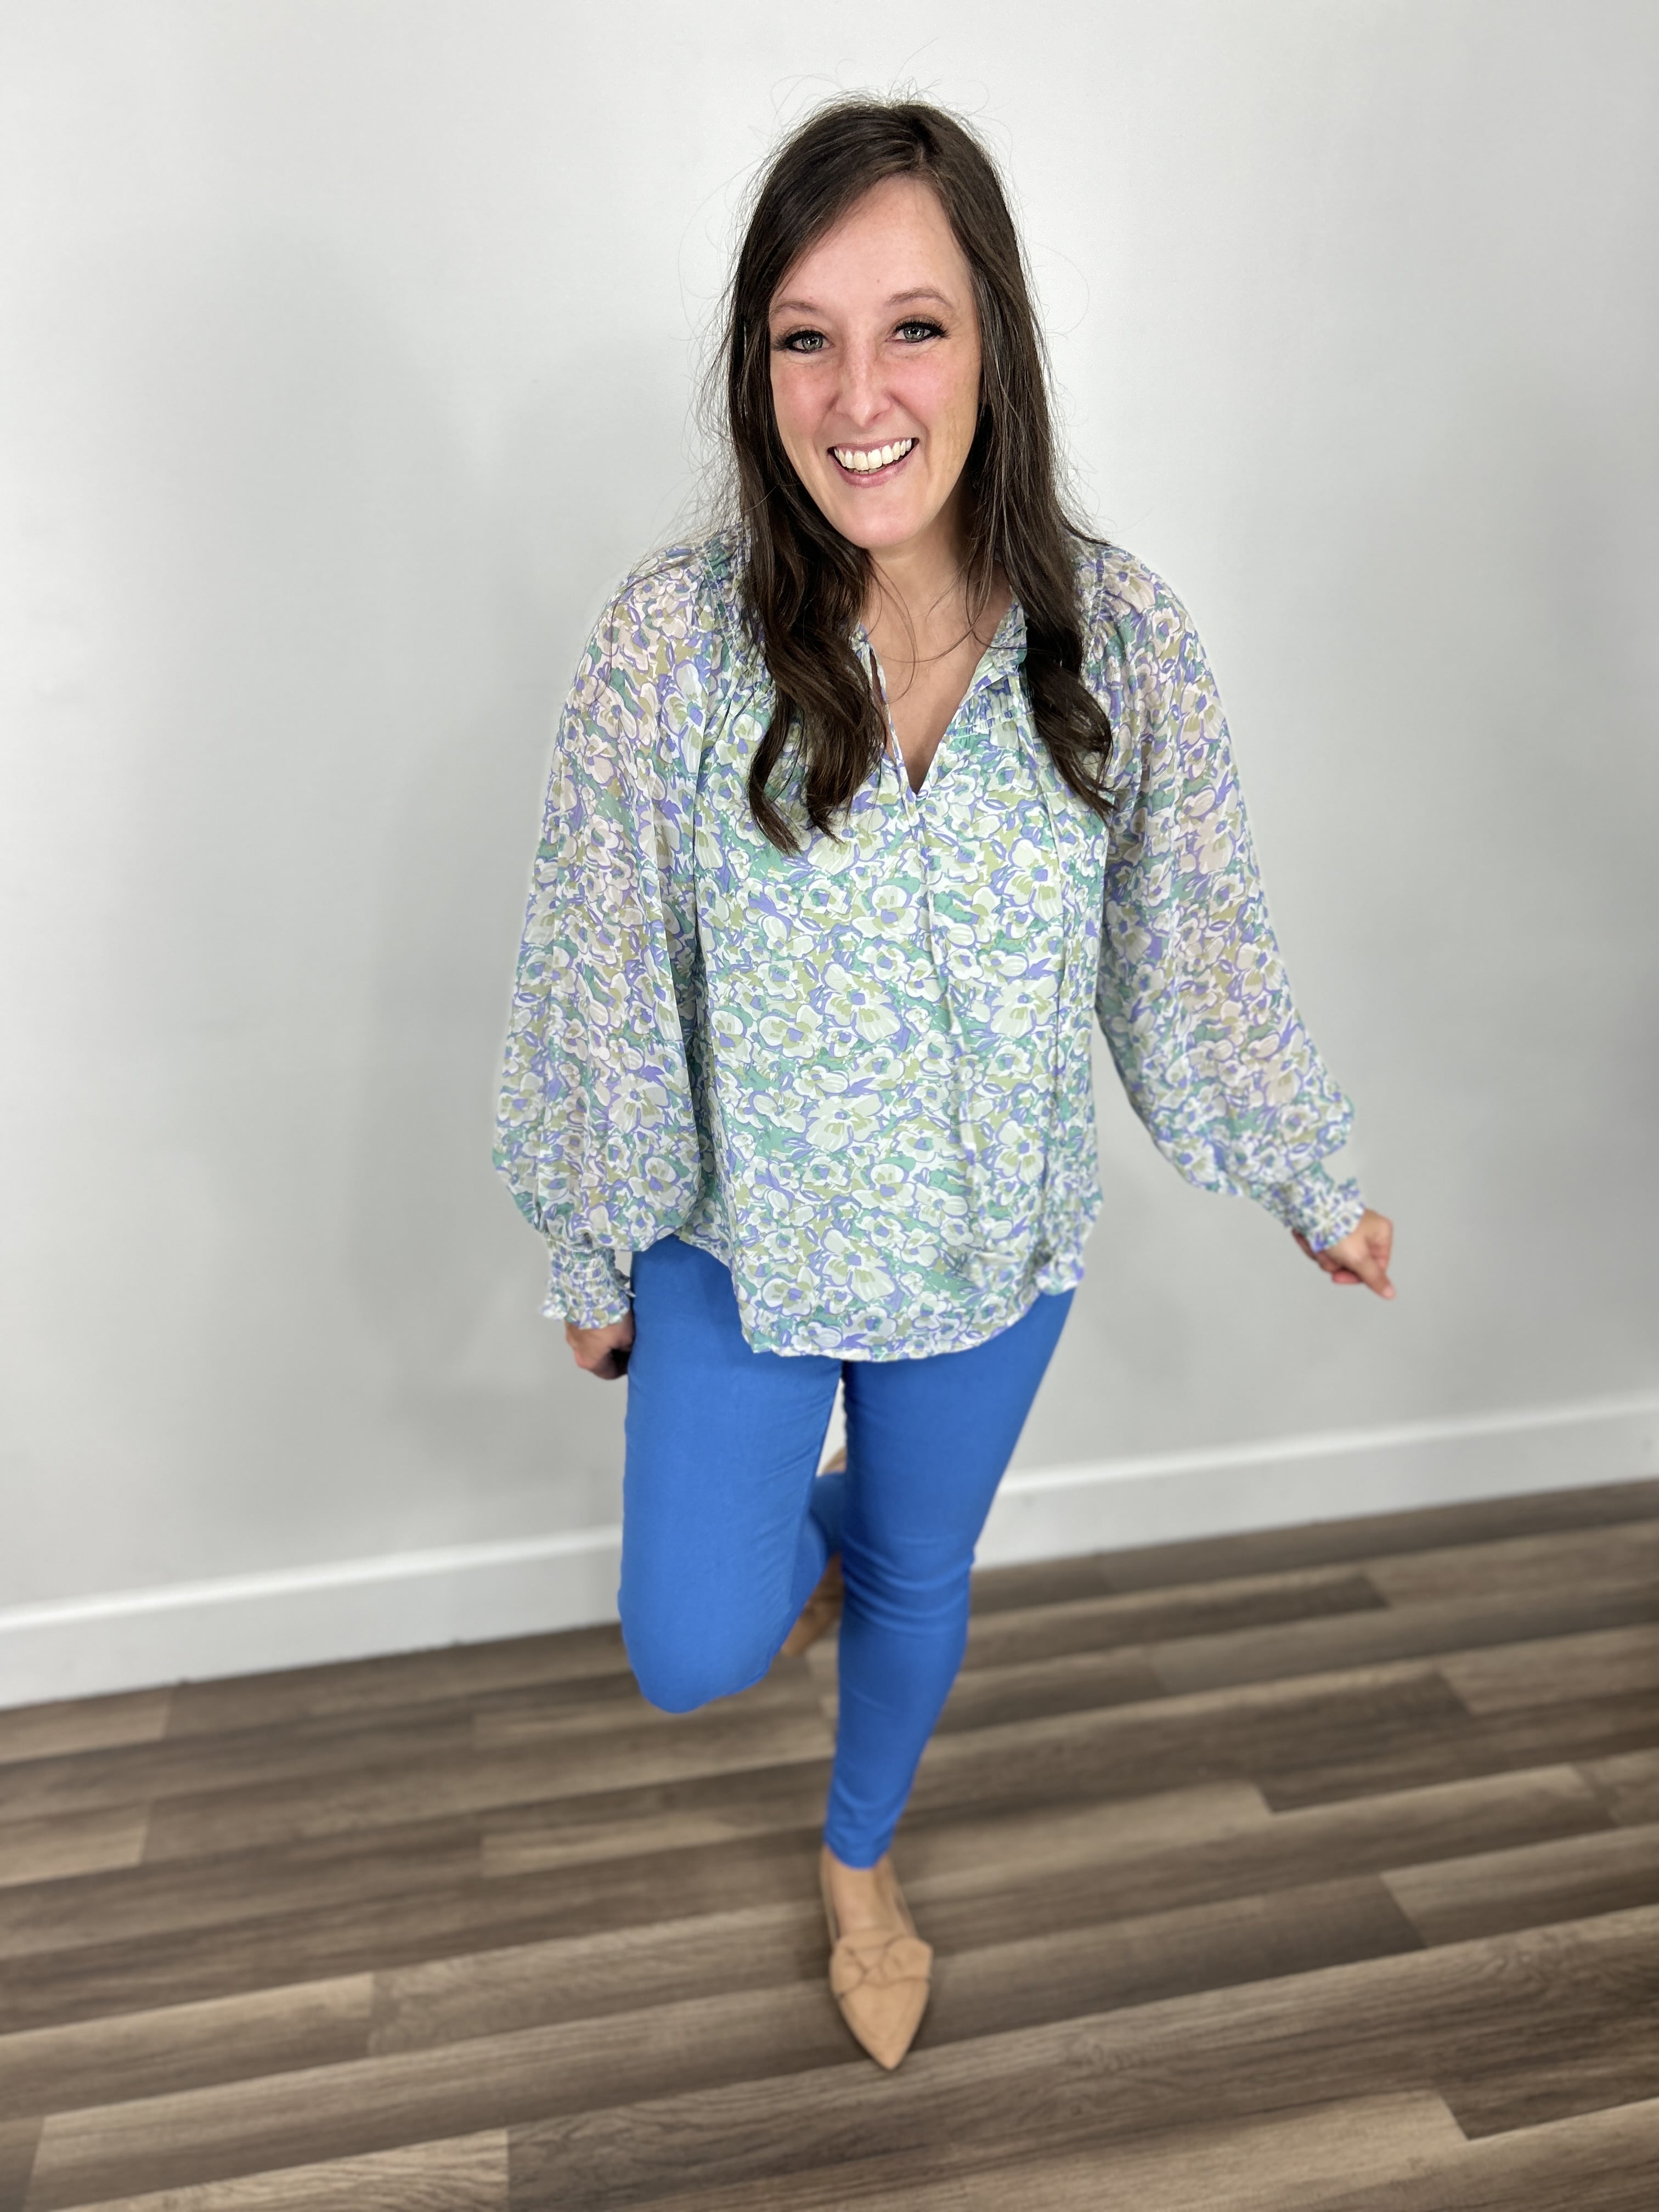 Women's floral print long sleeve top paired with blue stretchy skinny jeans.